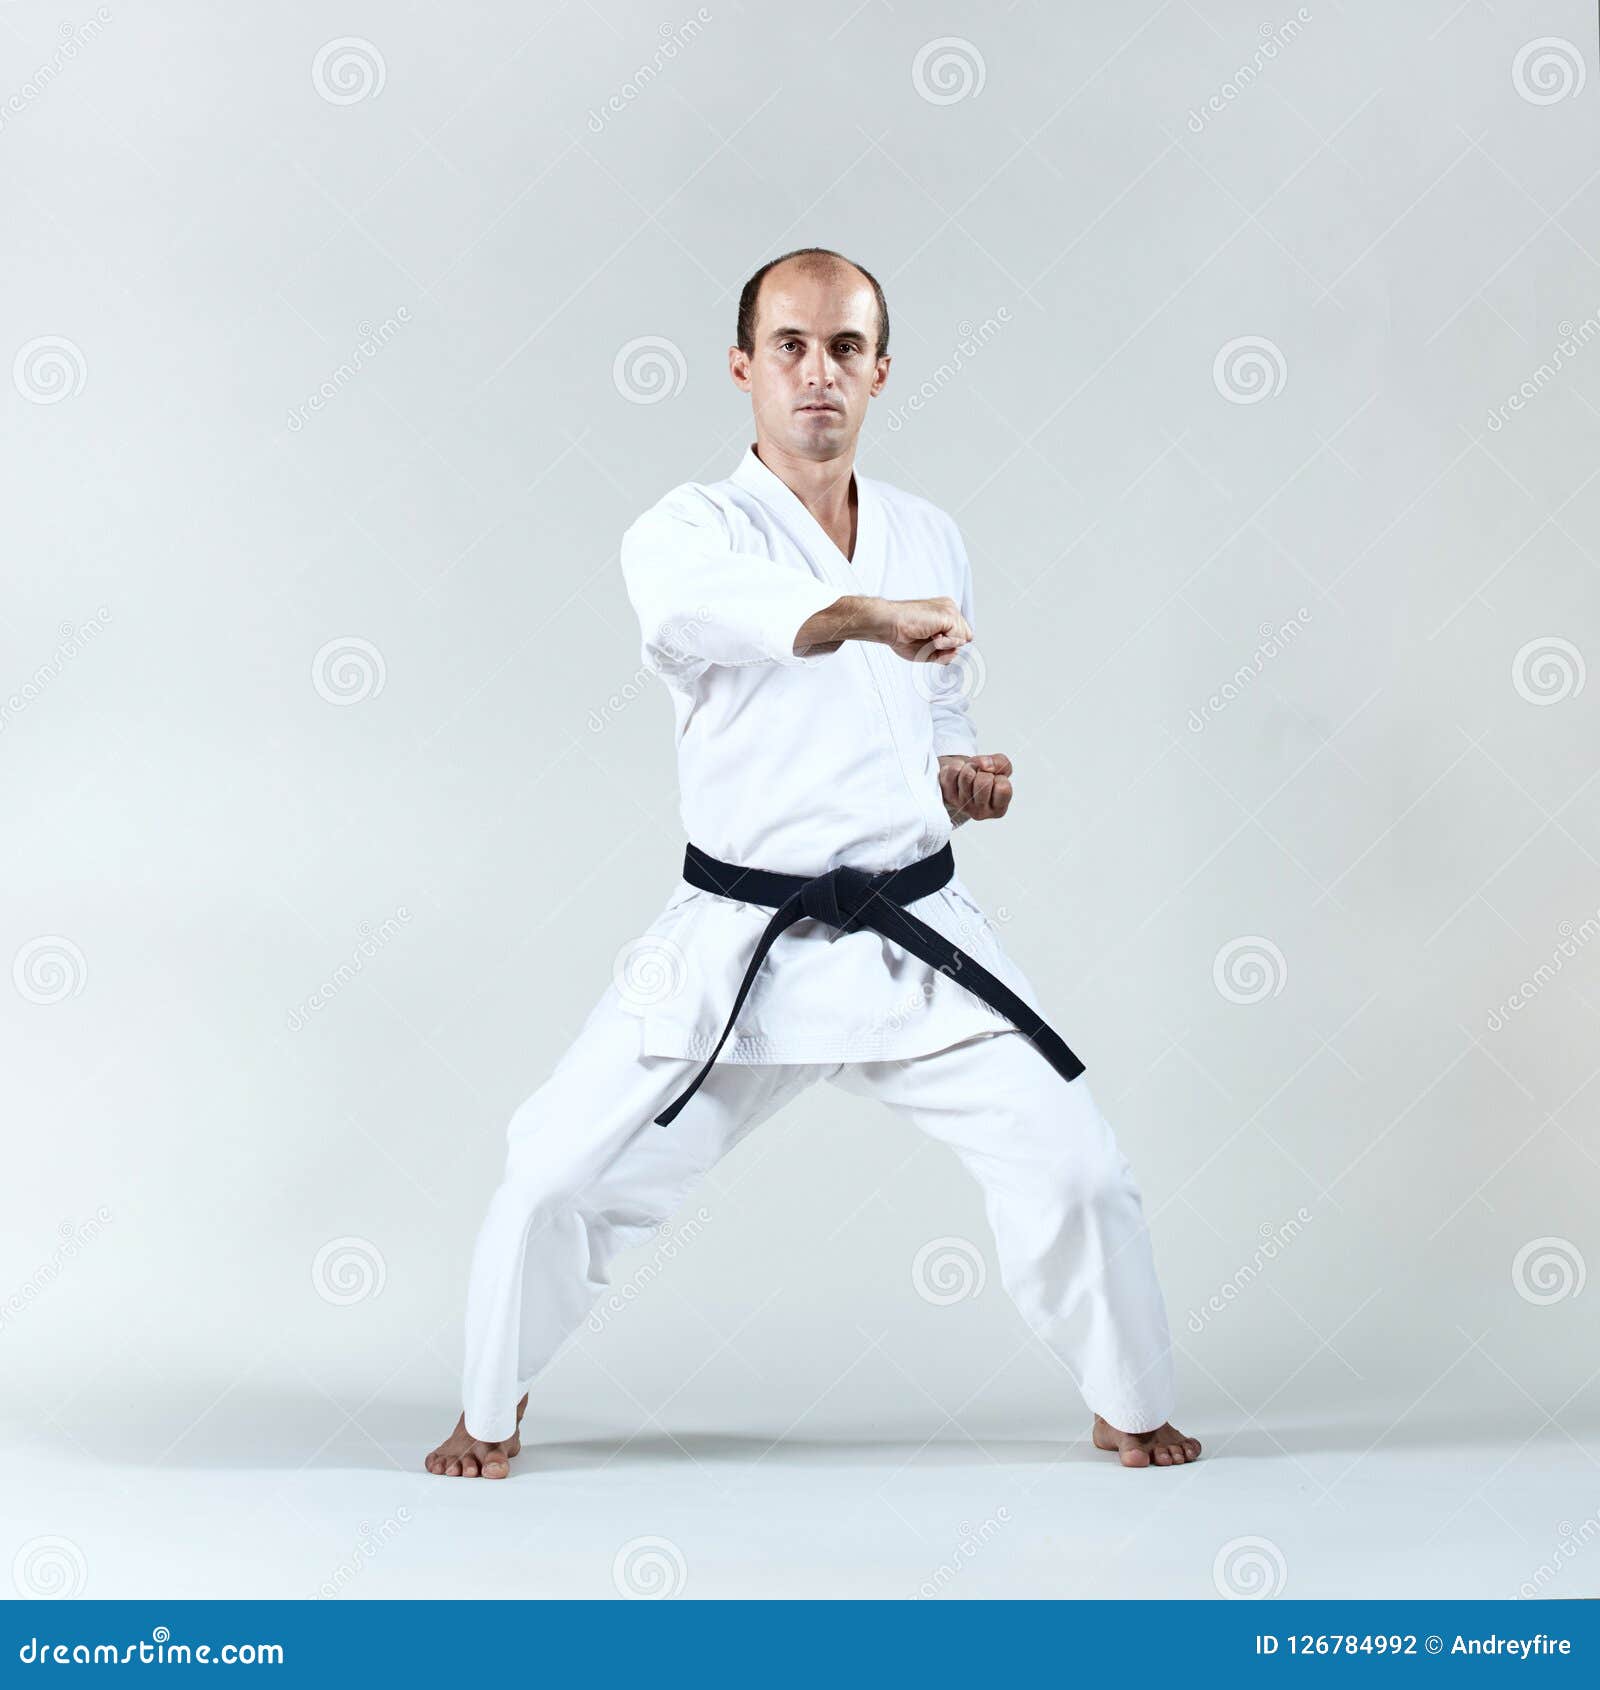 Male Athlete Trains Formal Karate Exercise Stock Photo - Image of